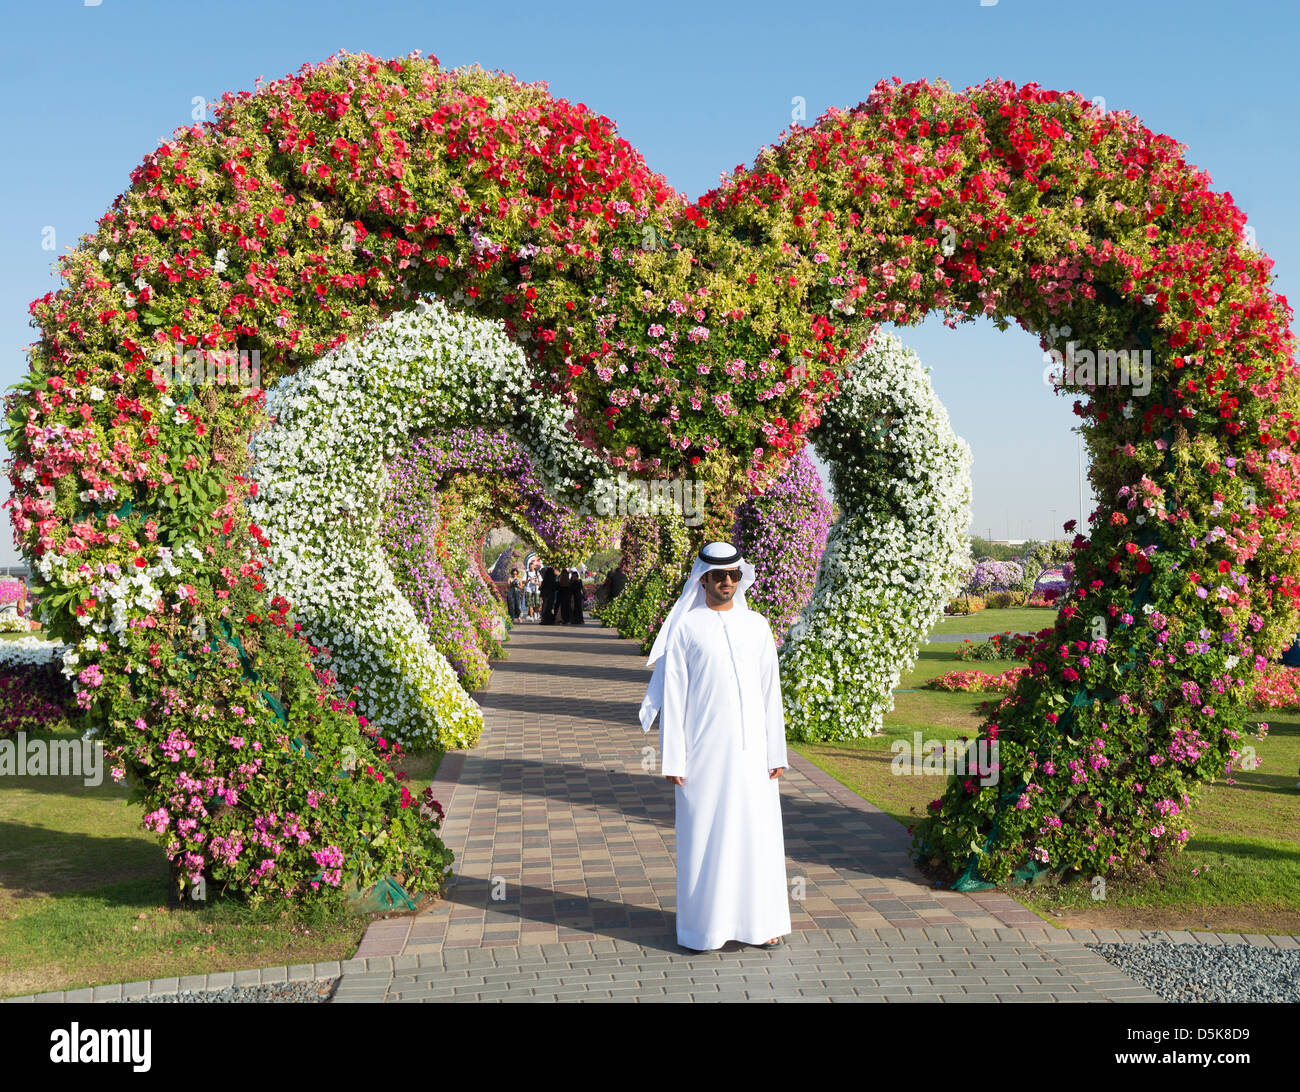 Miracle Garden in Dubai UAE, Opened in March 2013 and claimed to be World's largest flower garden Stock Photo